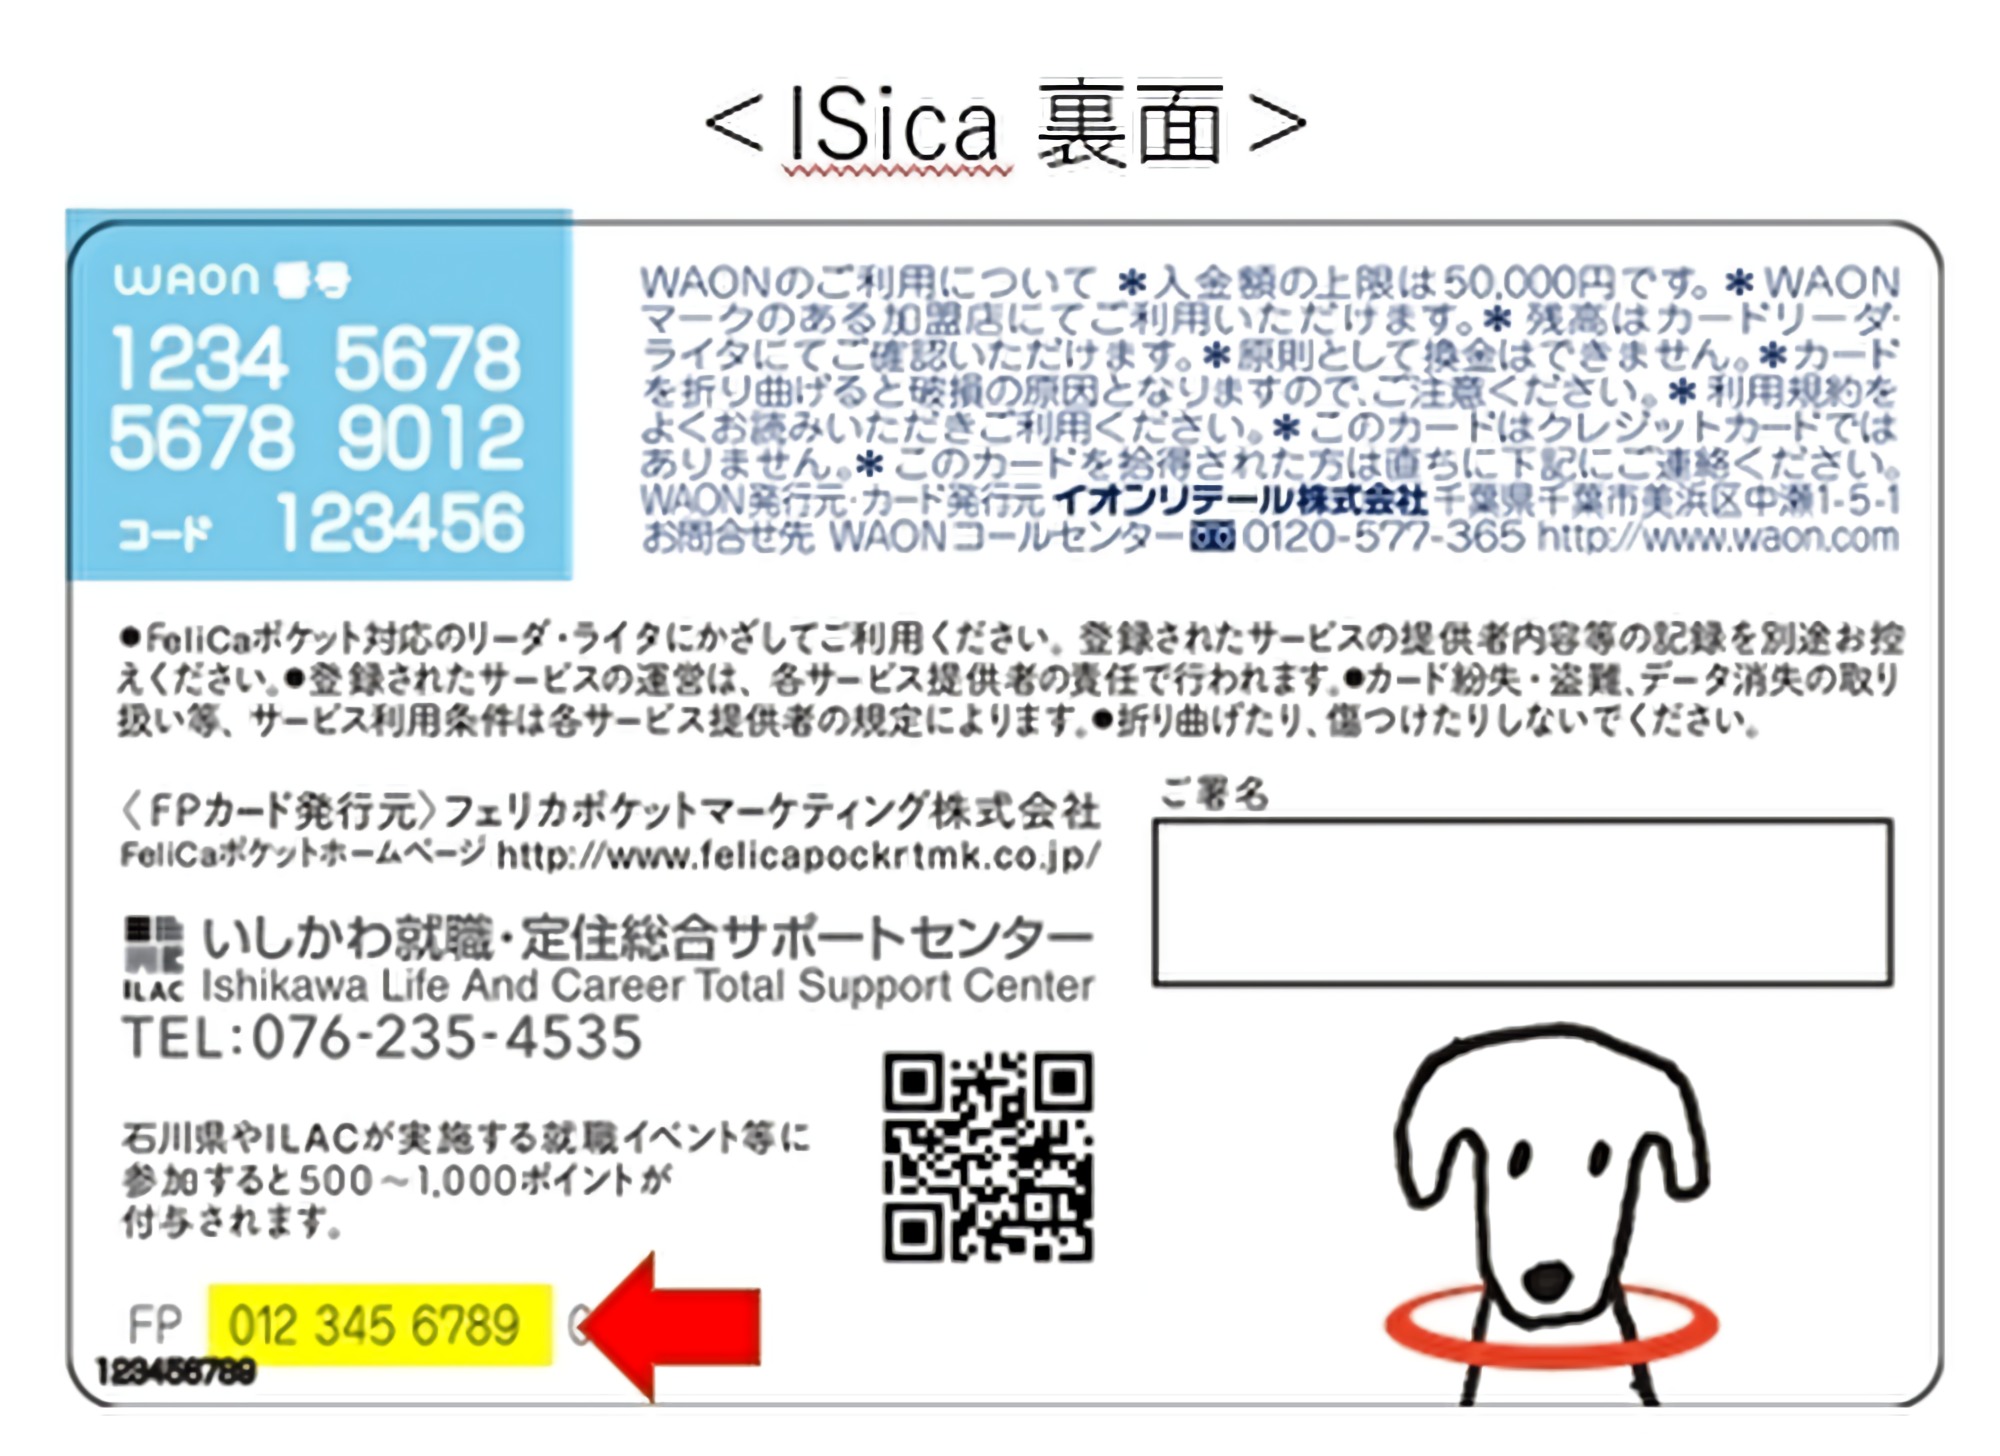 ISica裏面